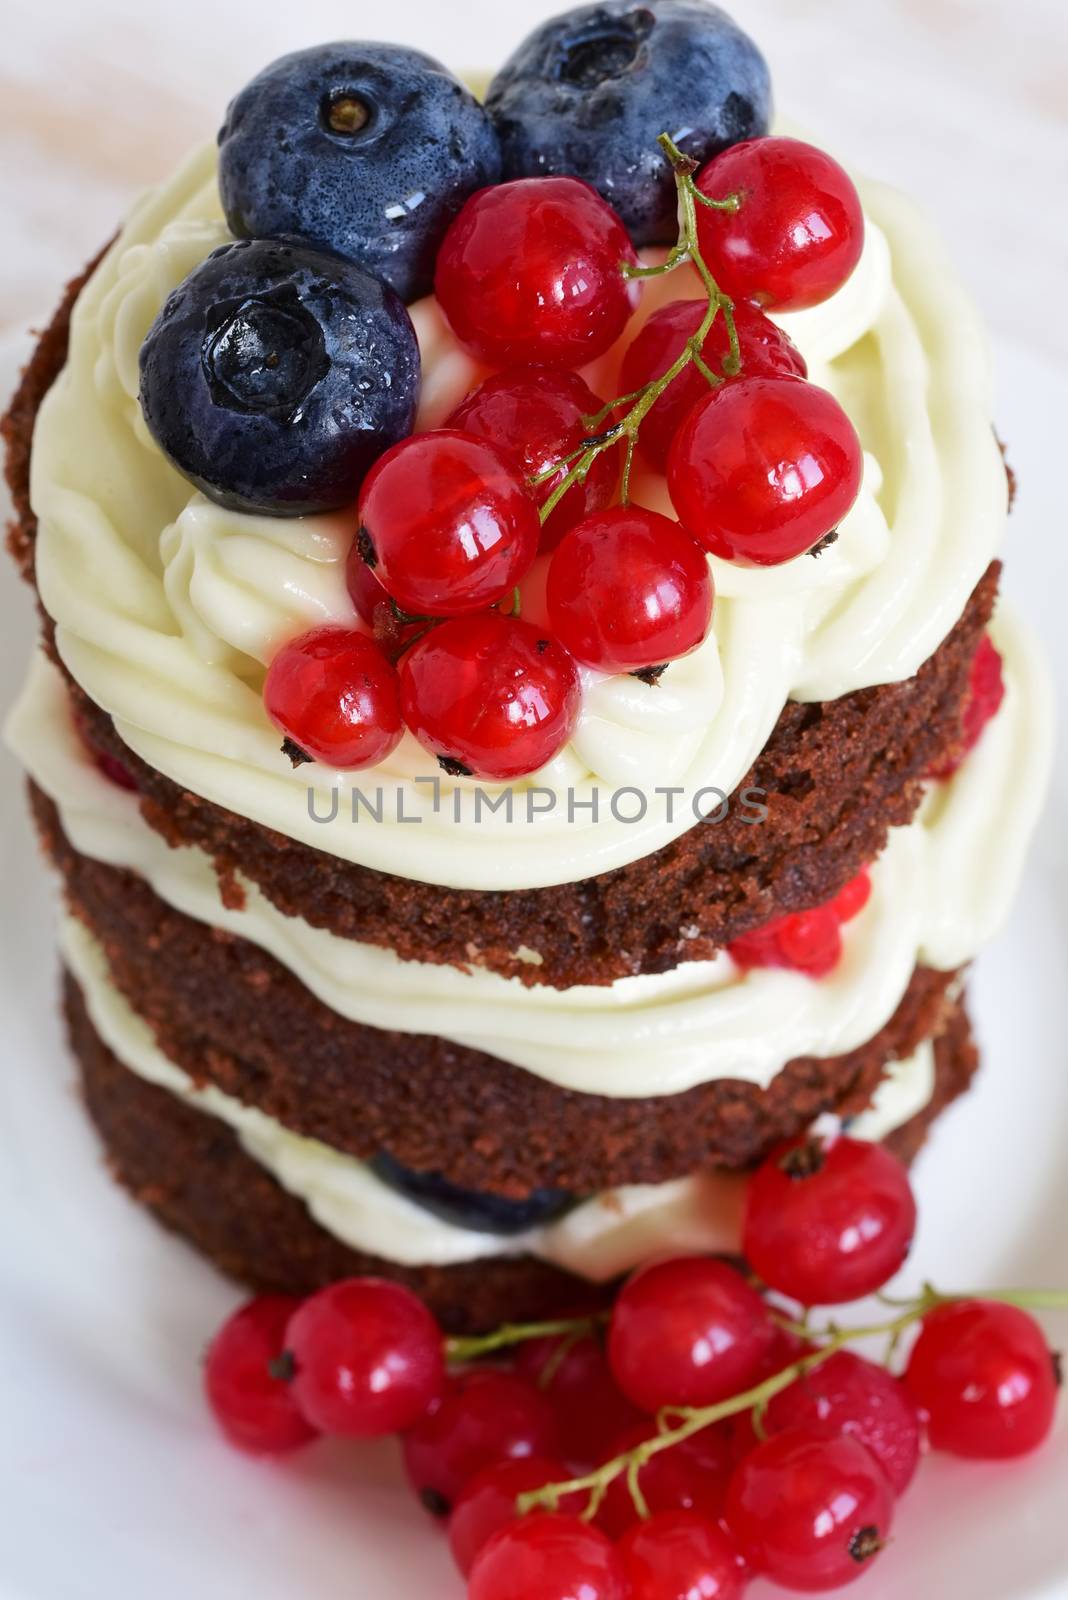 homemade cake with berries by Visual-Content